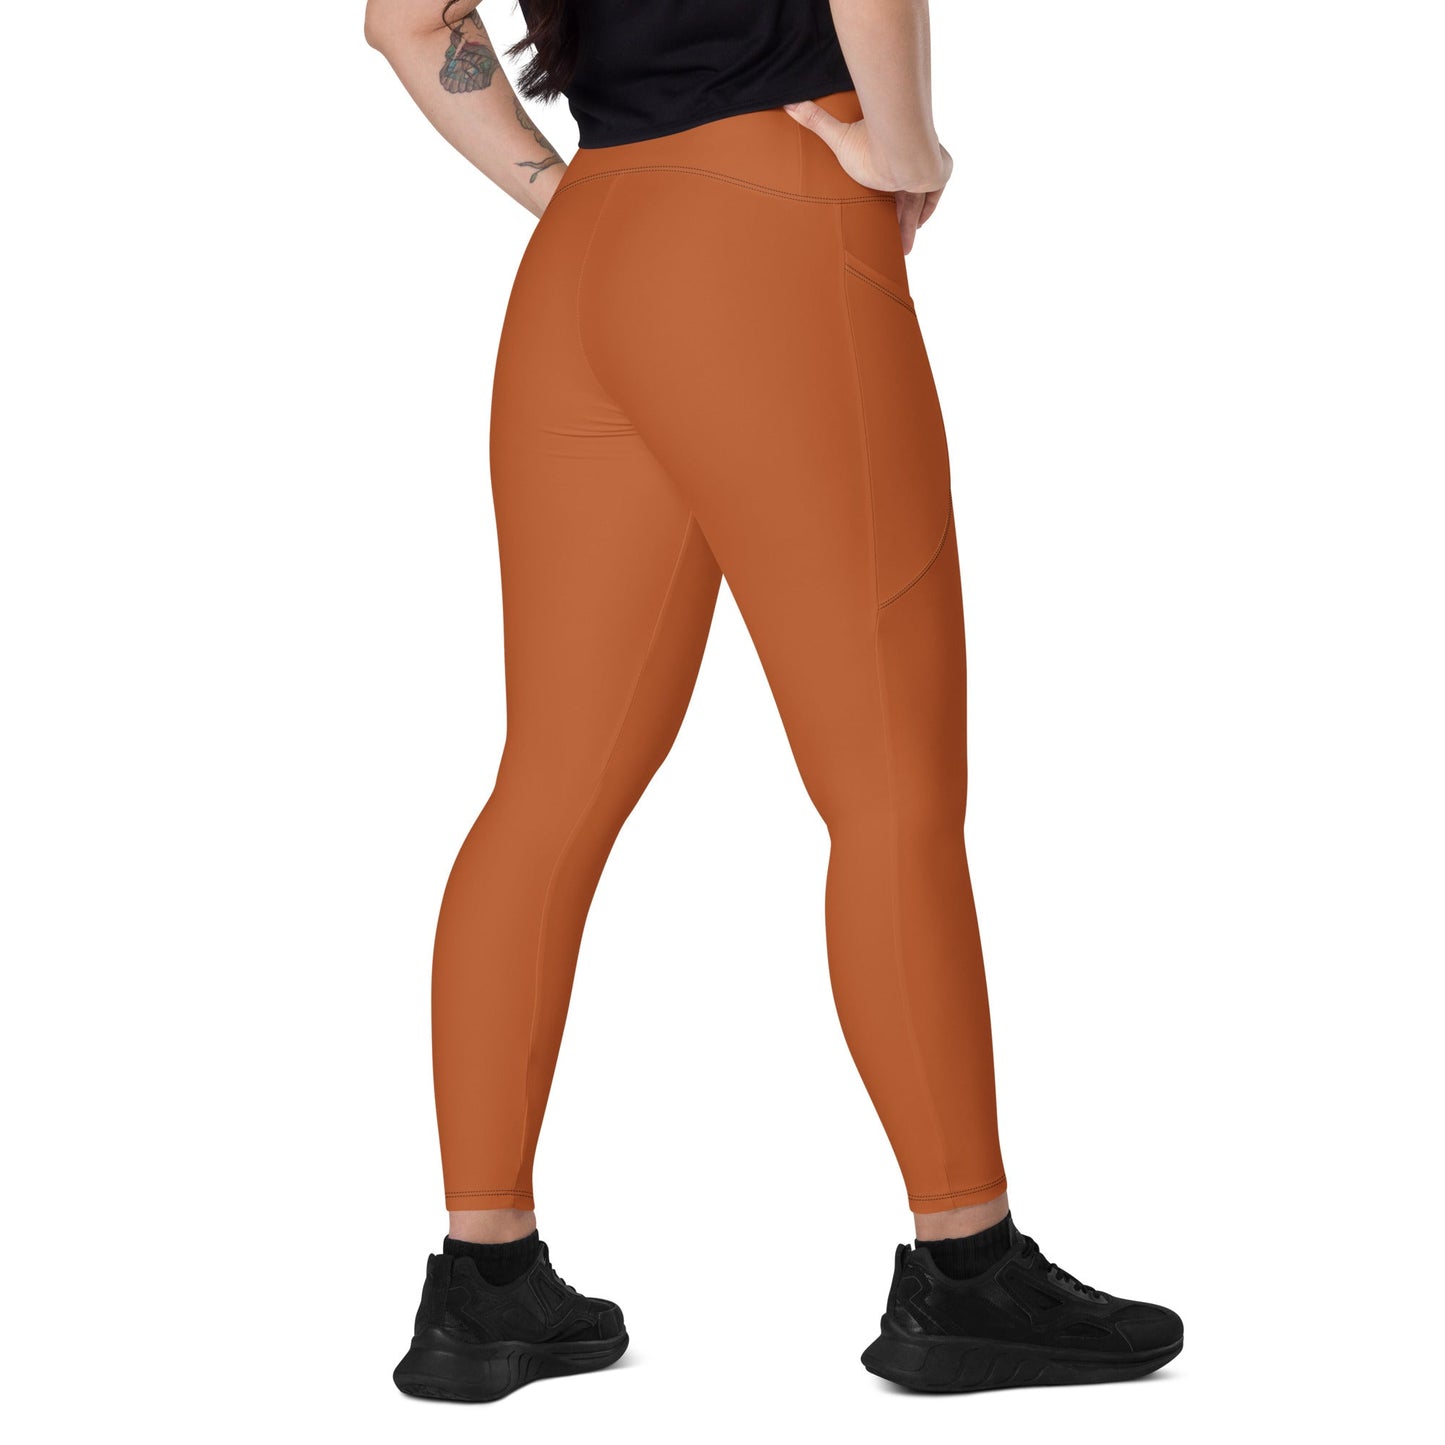 Rust Maple Leaf CROSSOVER leggings with pockets - Appalachian Bittersweet - Crossover Waist